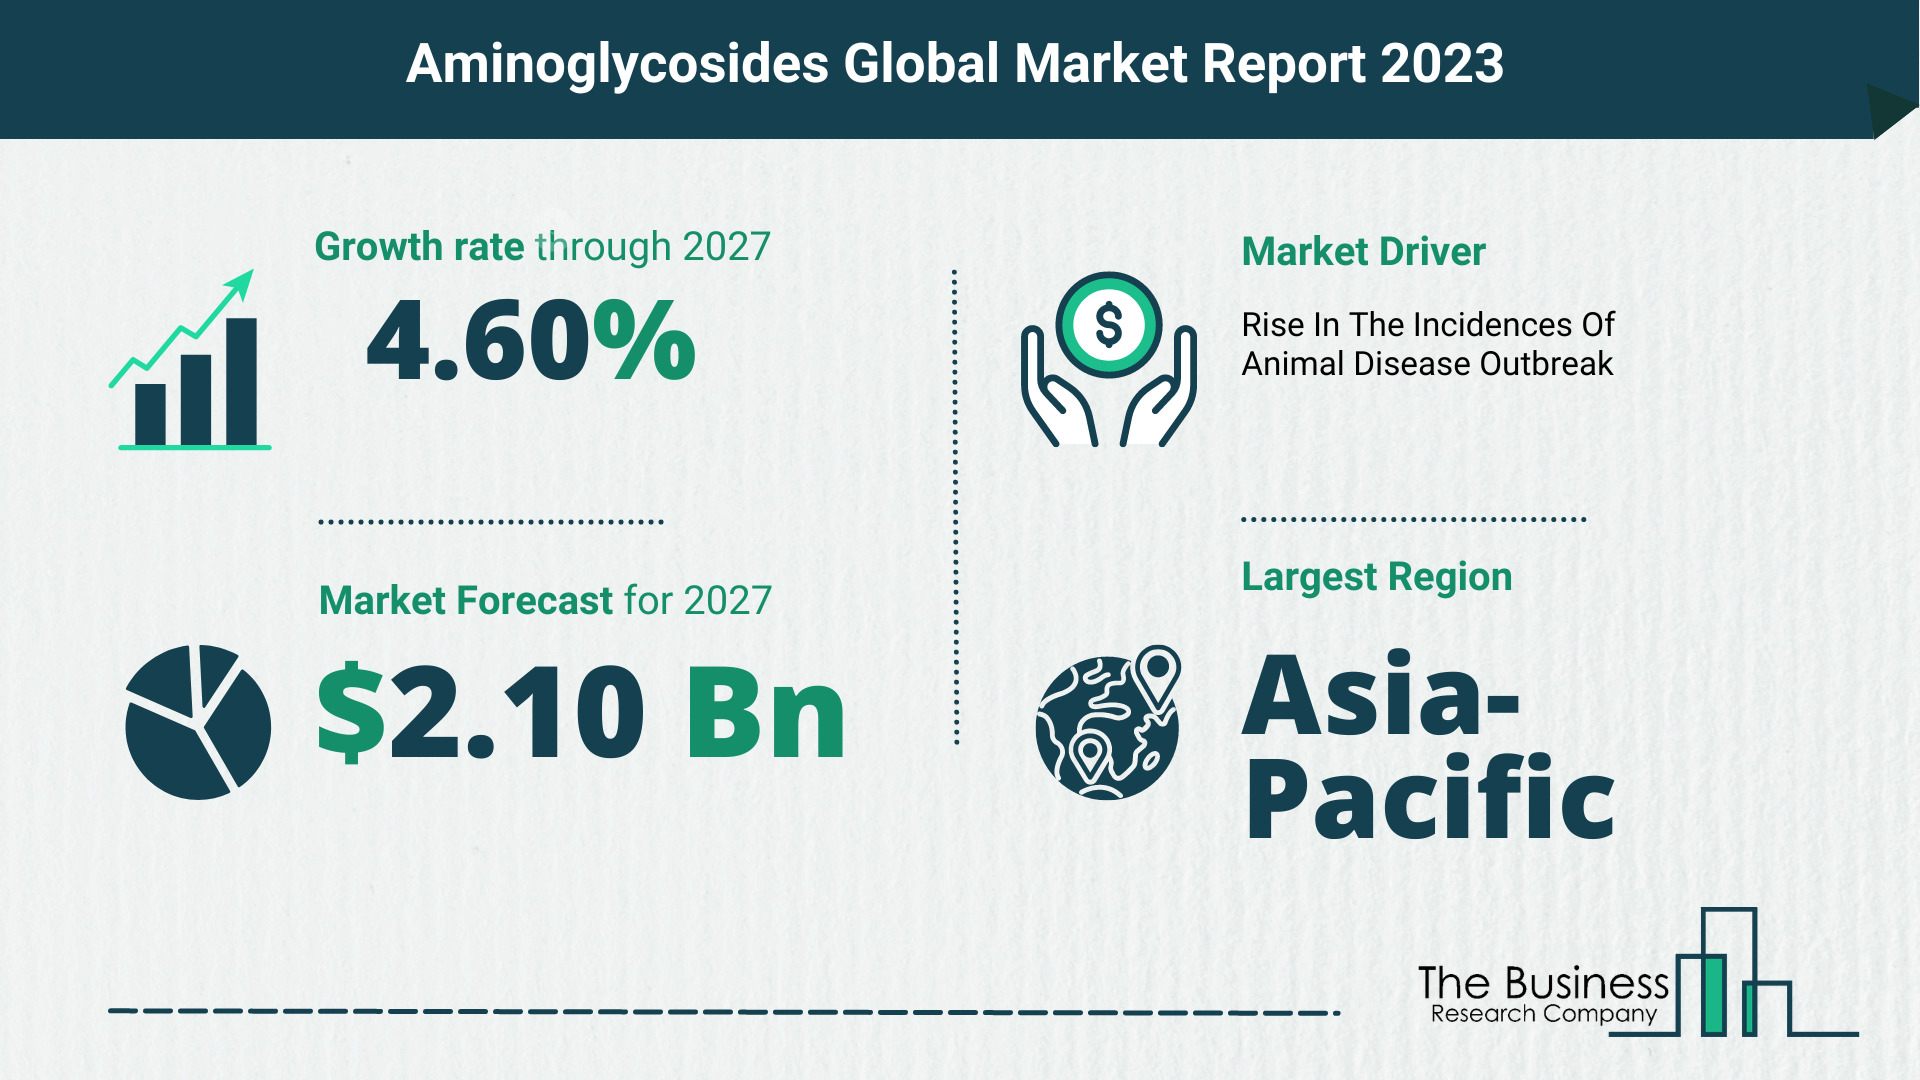 How Will The Aminoglycosides Market Globally Expand In 2023?